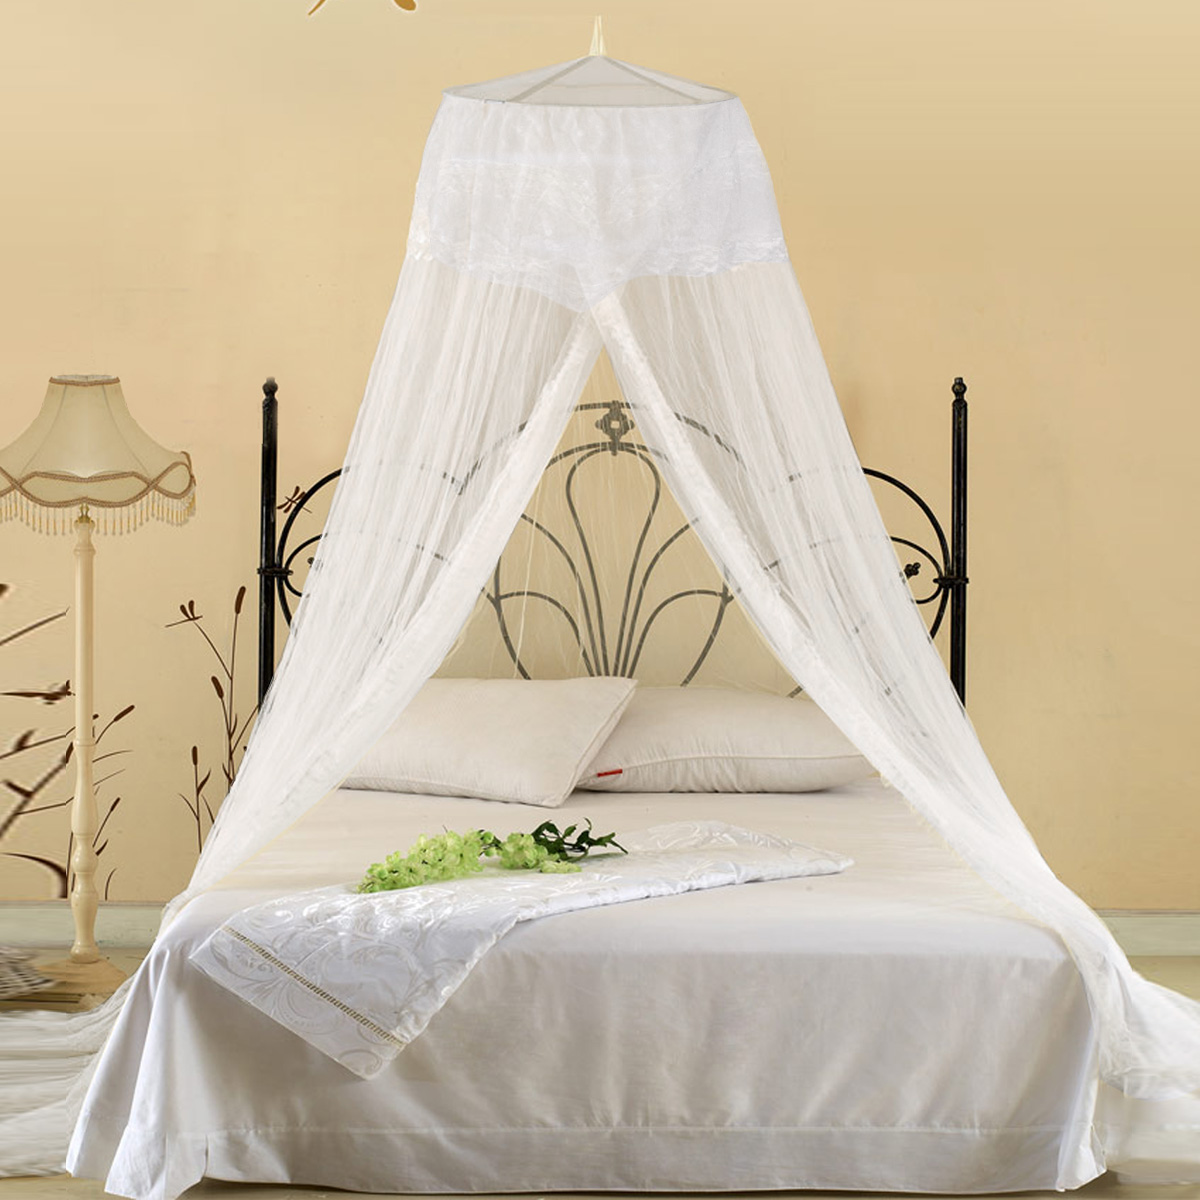 

Mosquito Net Bed Canopy Netting Fly Insect Room Protection Bedding Outdoor Curtain Dome